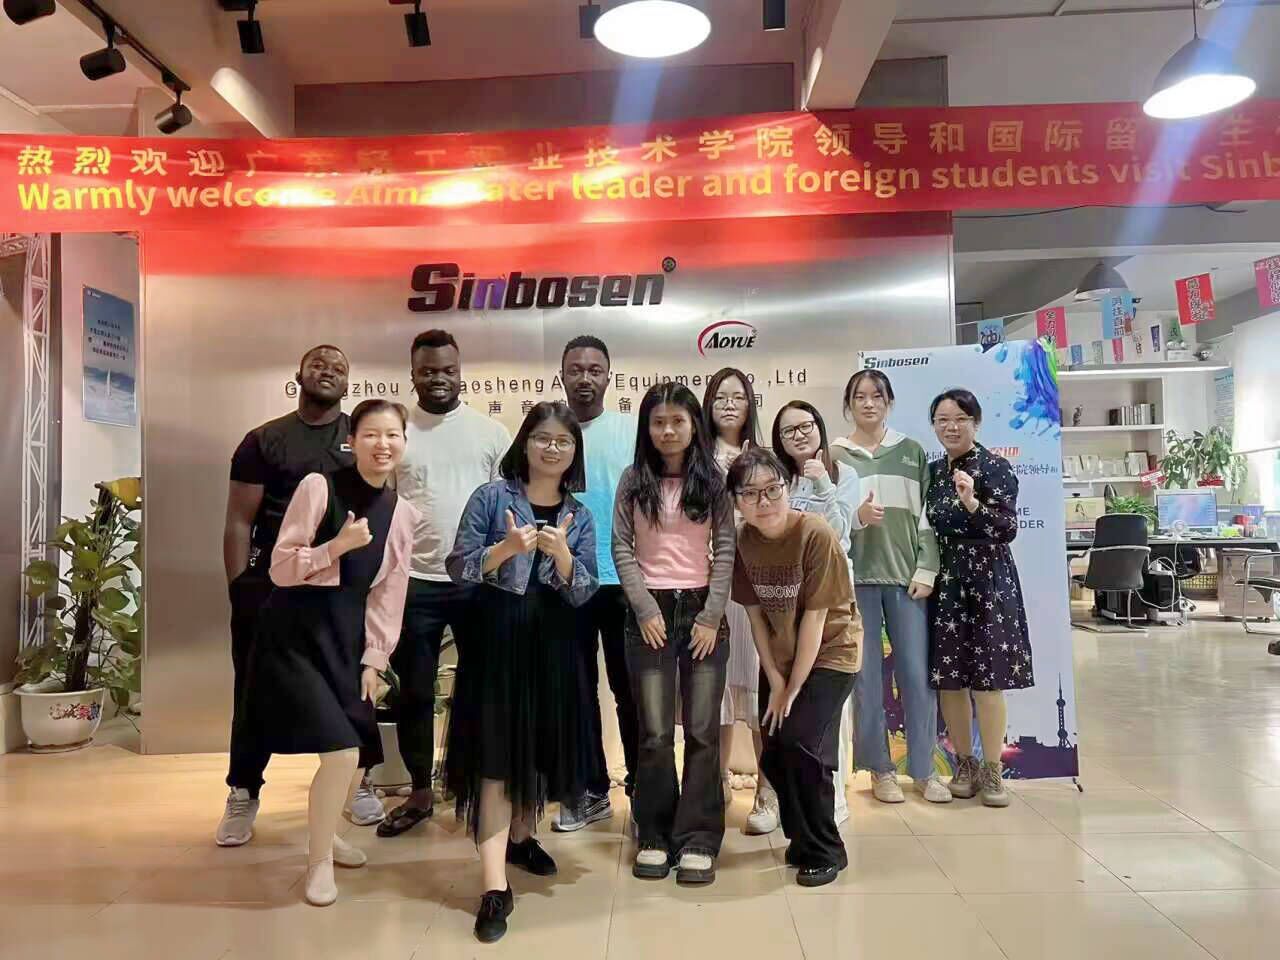 Sinbosen warmly welcomes Nigerian students and teachers from Guangdong Light Industry Vocational College to visit